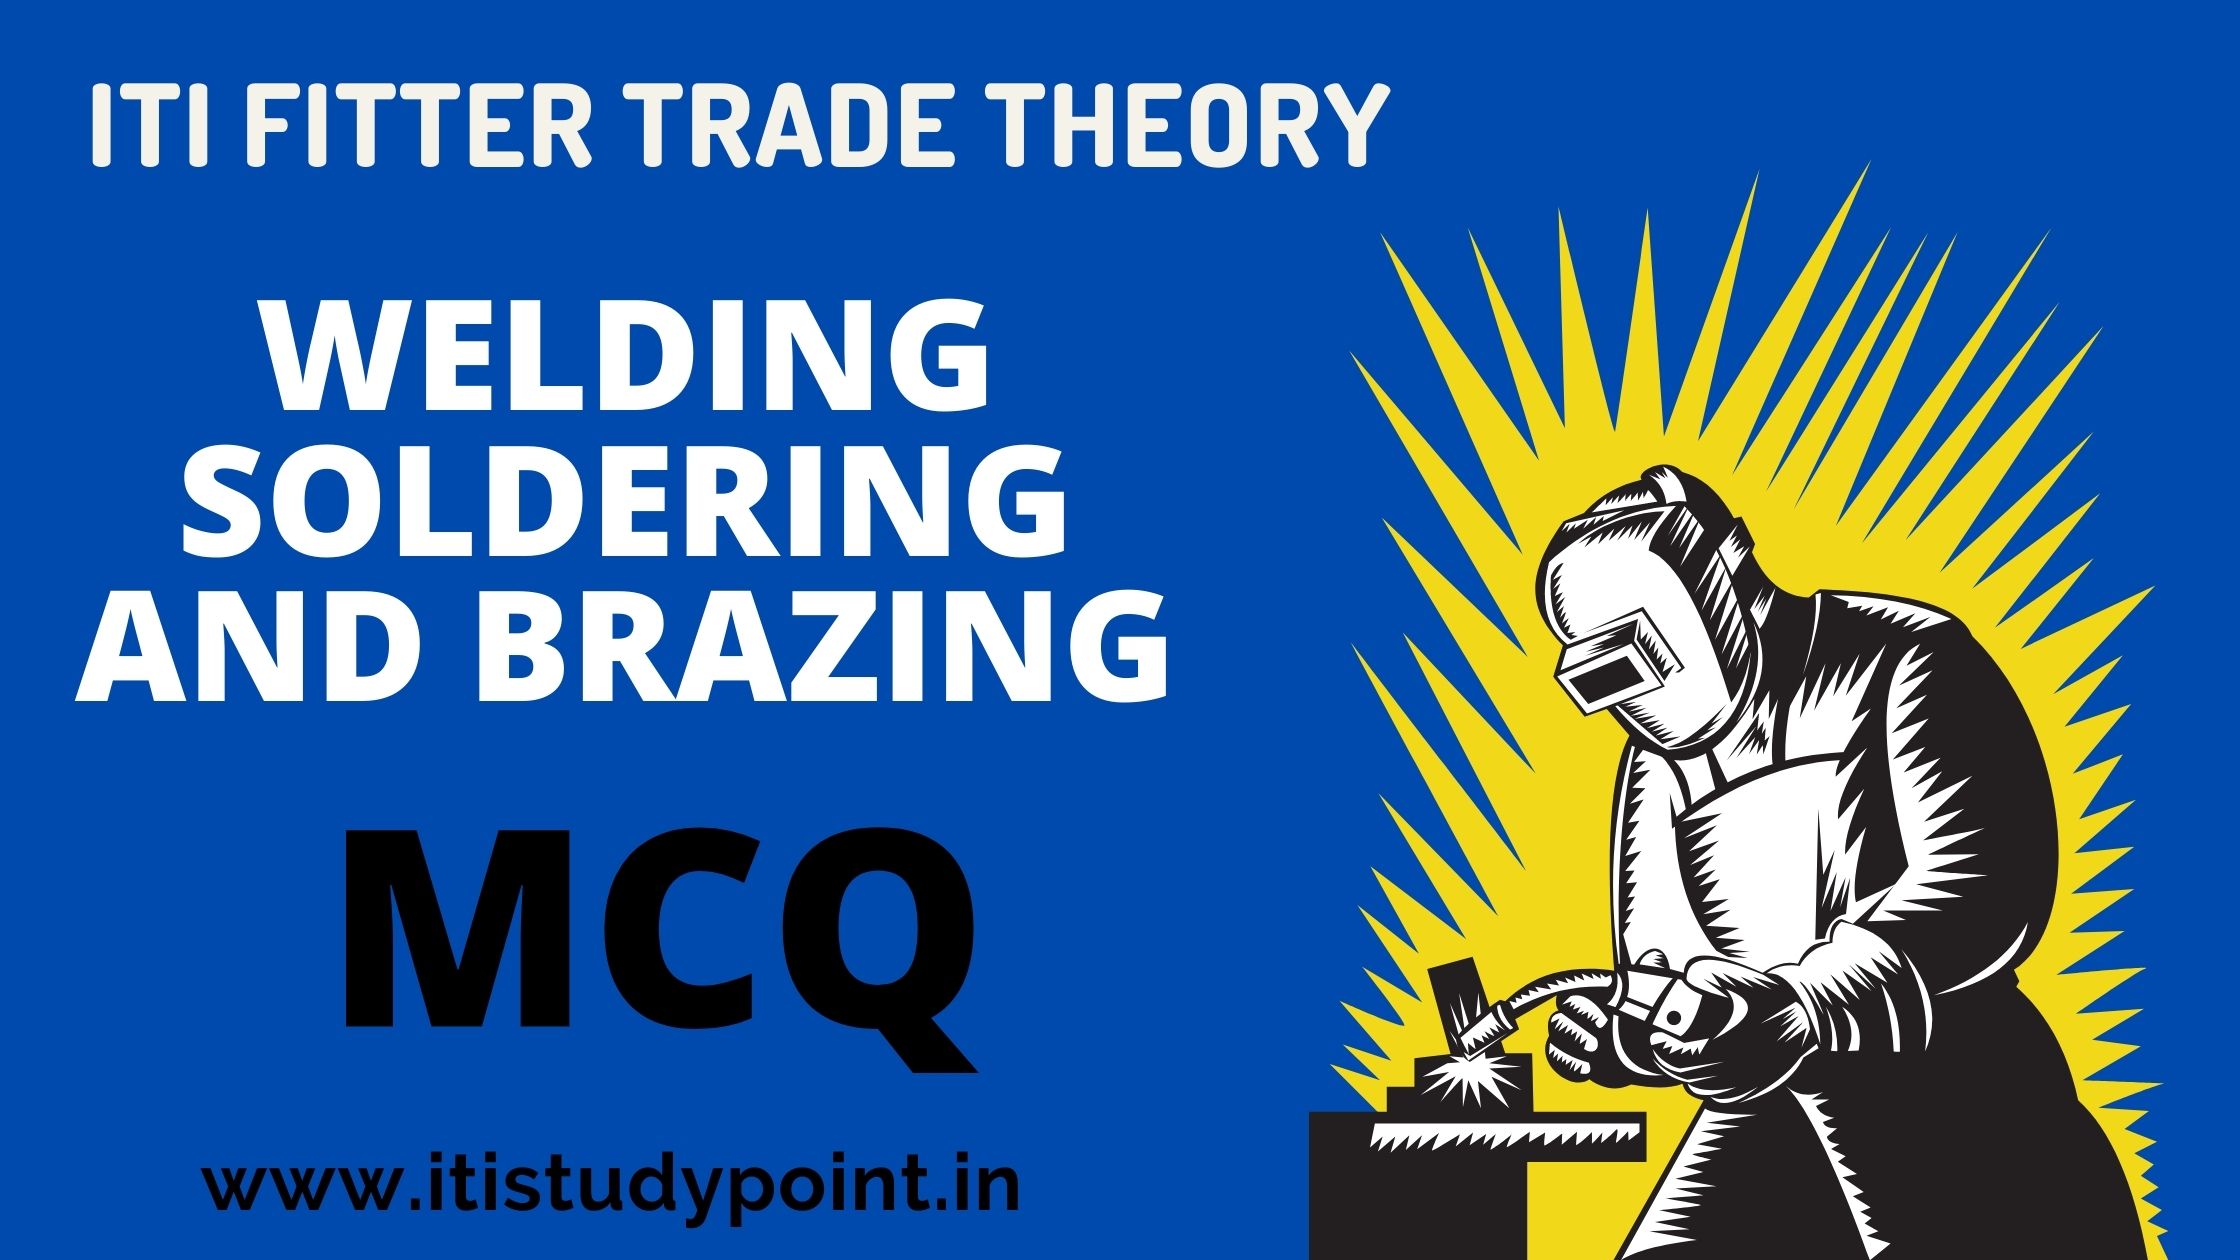 WELDING SOLDERING AND BRAZING MCQ 3